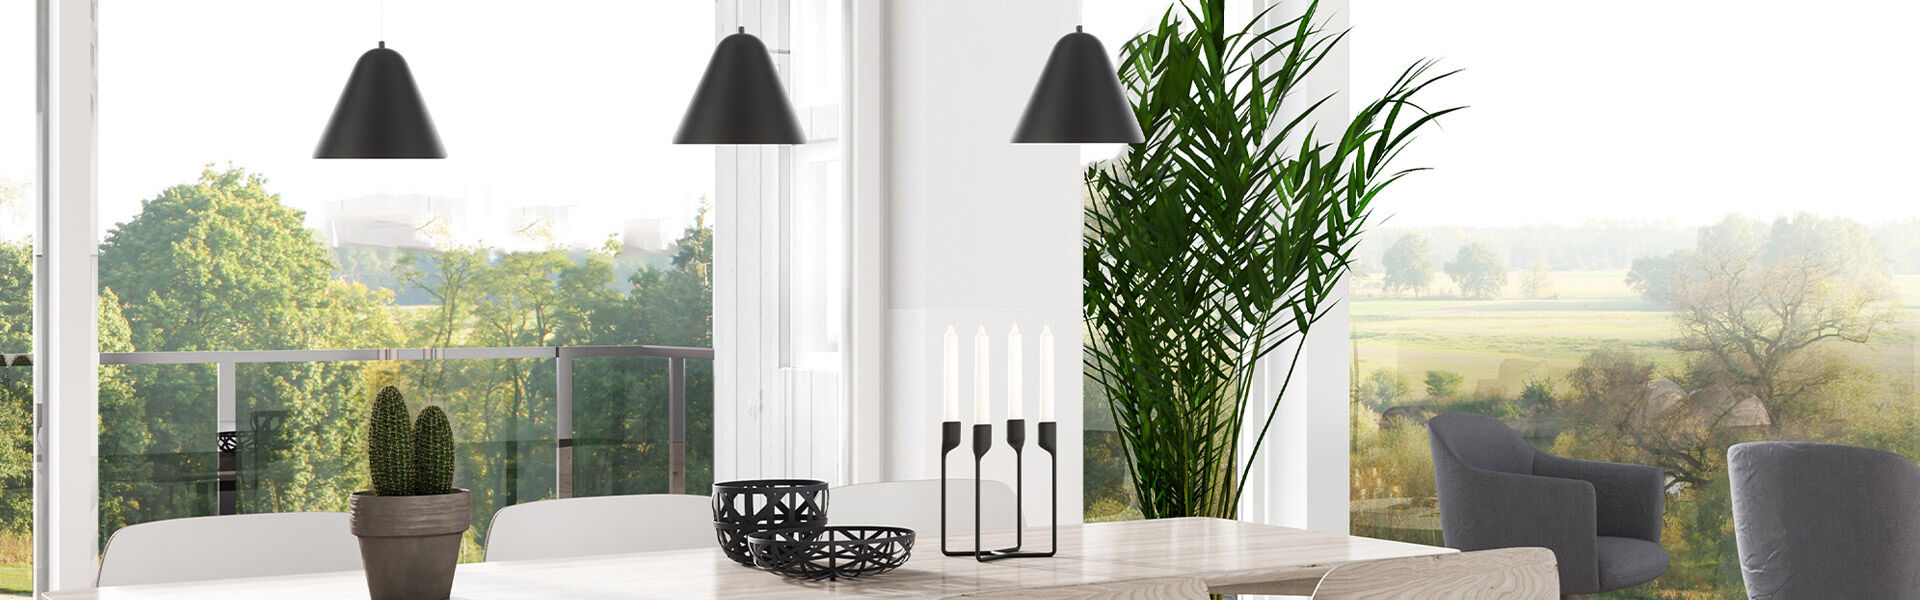 WAC Lighting | Up to 15% Off Select Designs | ends 3.18